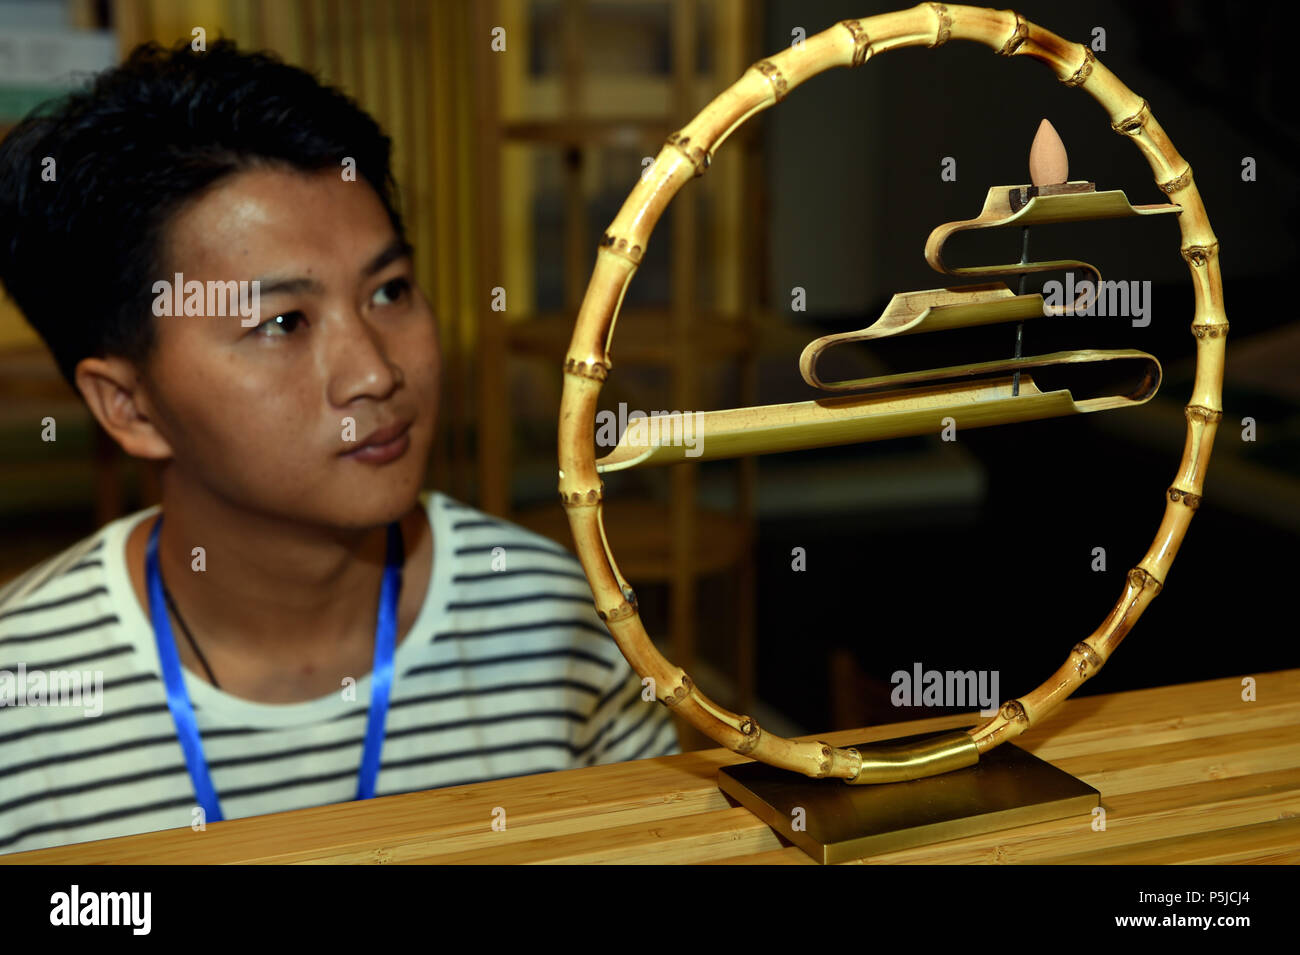 Shaowu, China's Fujian Province. 27th June, 2018. Contestant Lai Hanshi from a furniture design firm in Zhongshan of Guangdong Province shows his bamboo design in the final round of Taichi Master Bamboo Industry International Industrial Design Competition 2018 in Shaowu, southeast China's Fujian Province, June 27, 2018. The competition received 6,517 bamboo designs from global contestants, with 25 pieces of works being qualified for the final round. Credit: Peng Zhangqing/Xinhua/Alamy Live News Stock Photo